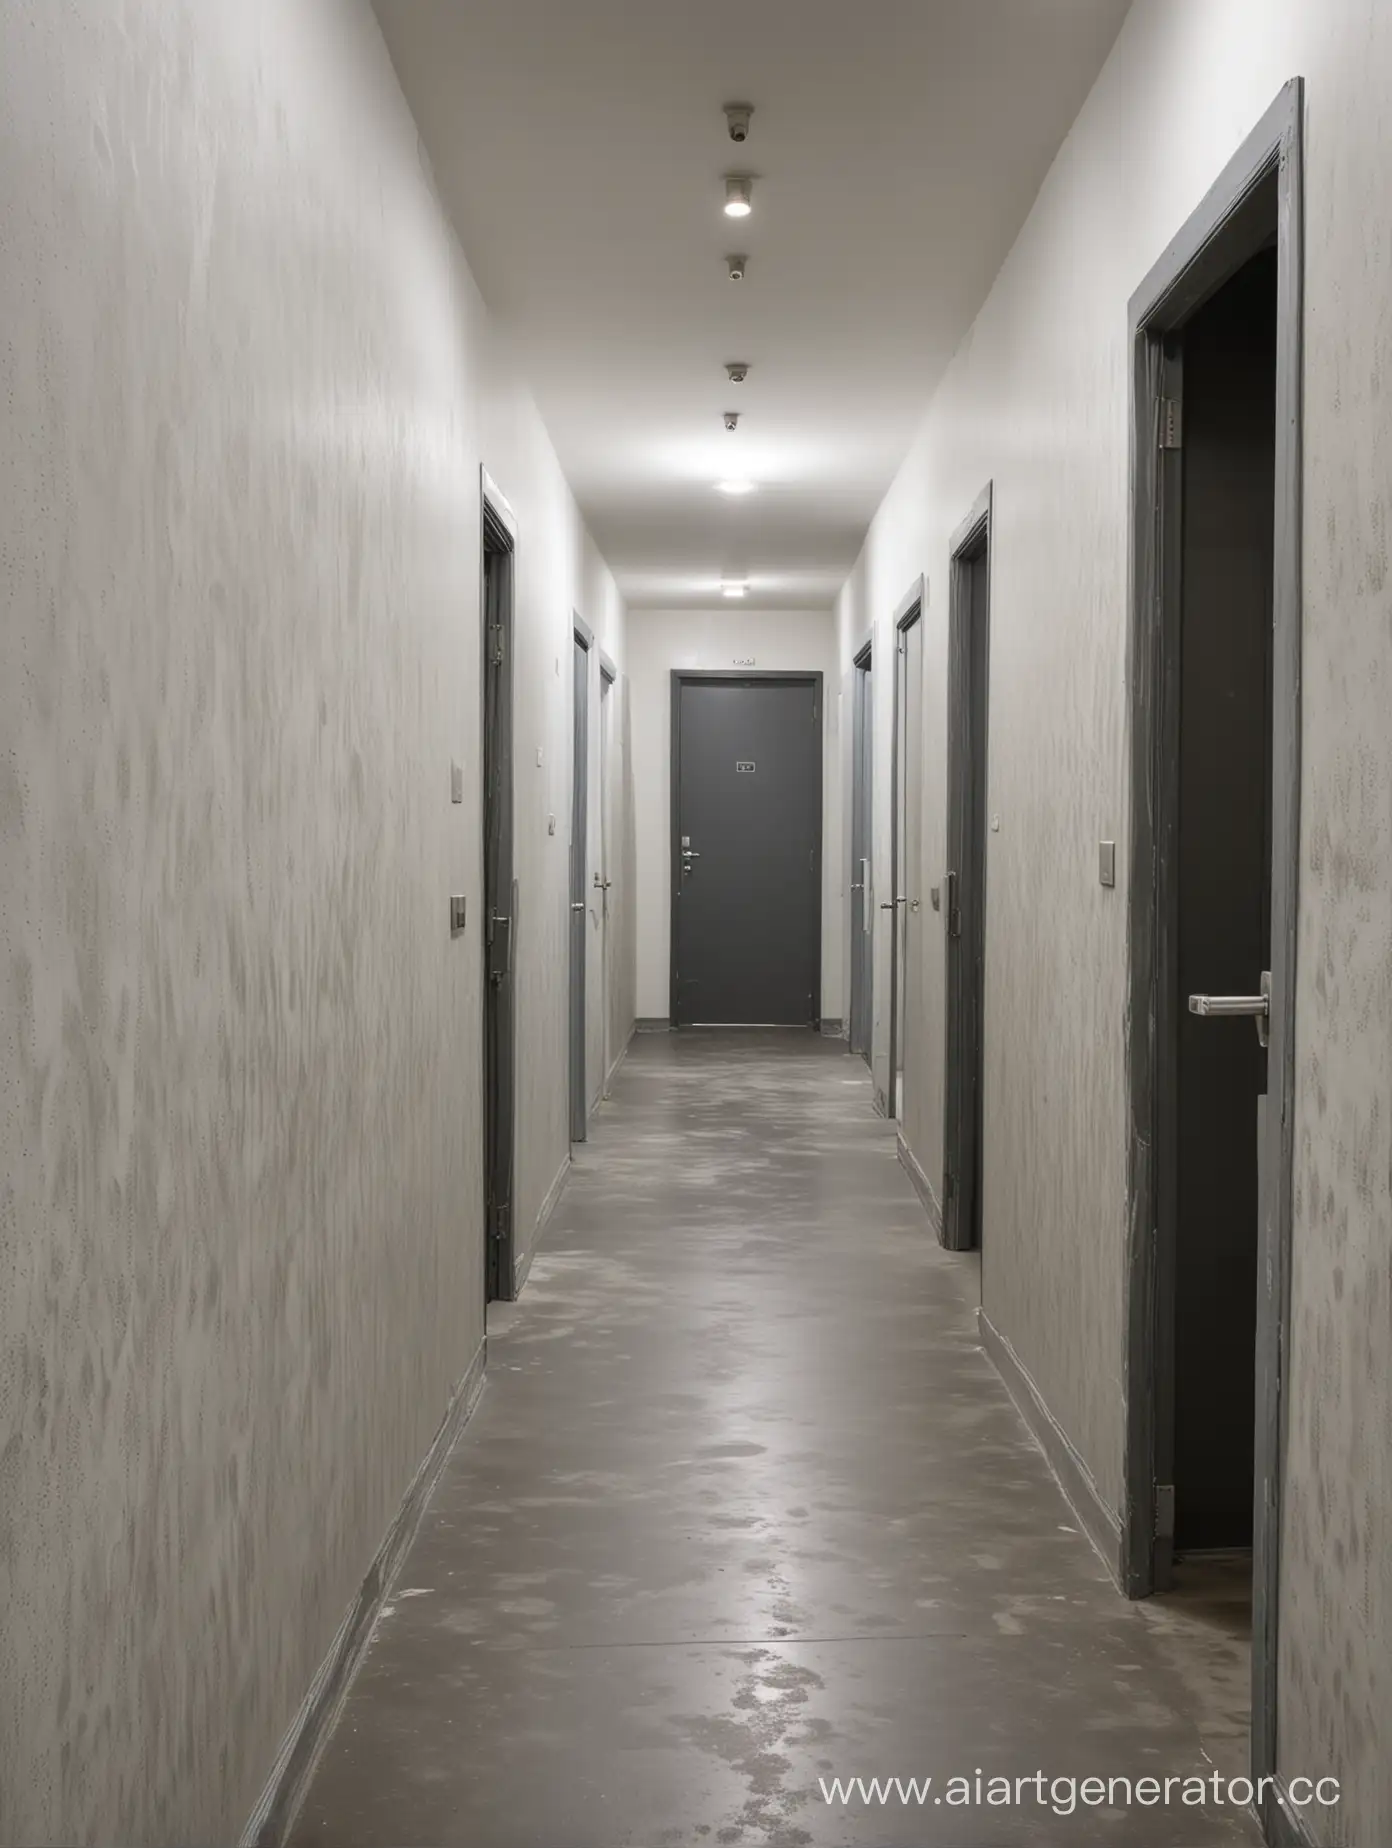 Mysterious-Corridor-with-Opening-and-Closing-Doors-in-Vinyl-Wallpaper-Setting